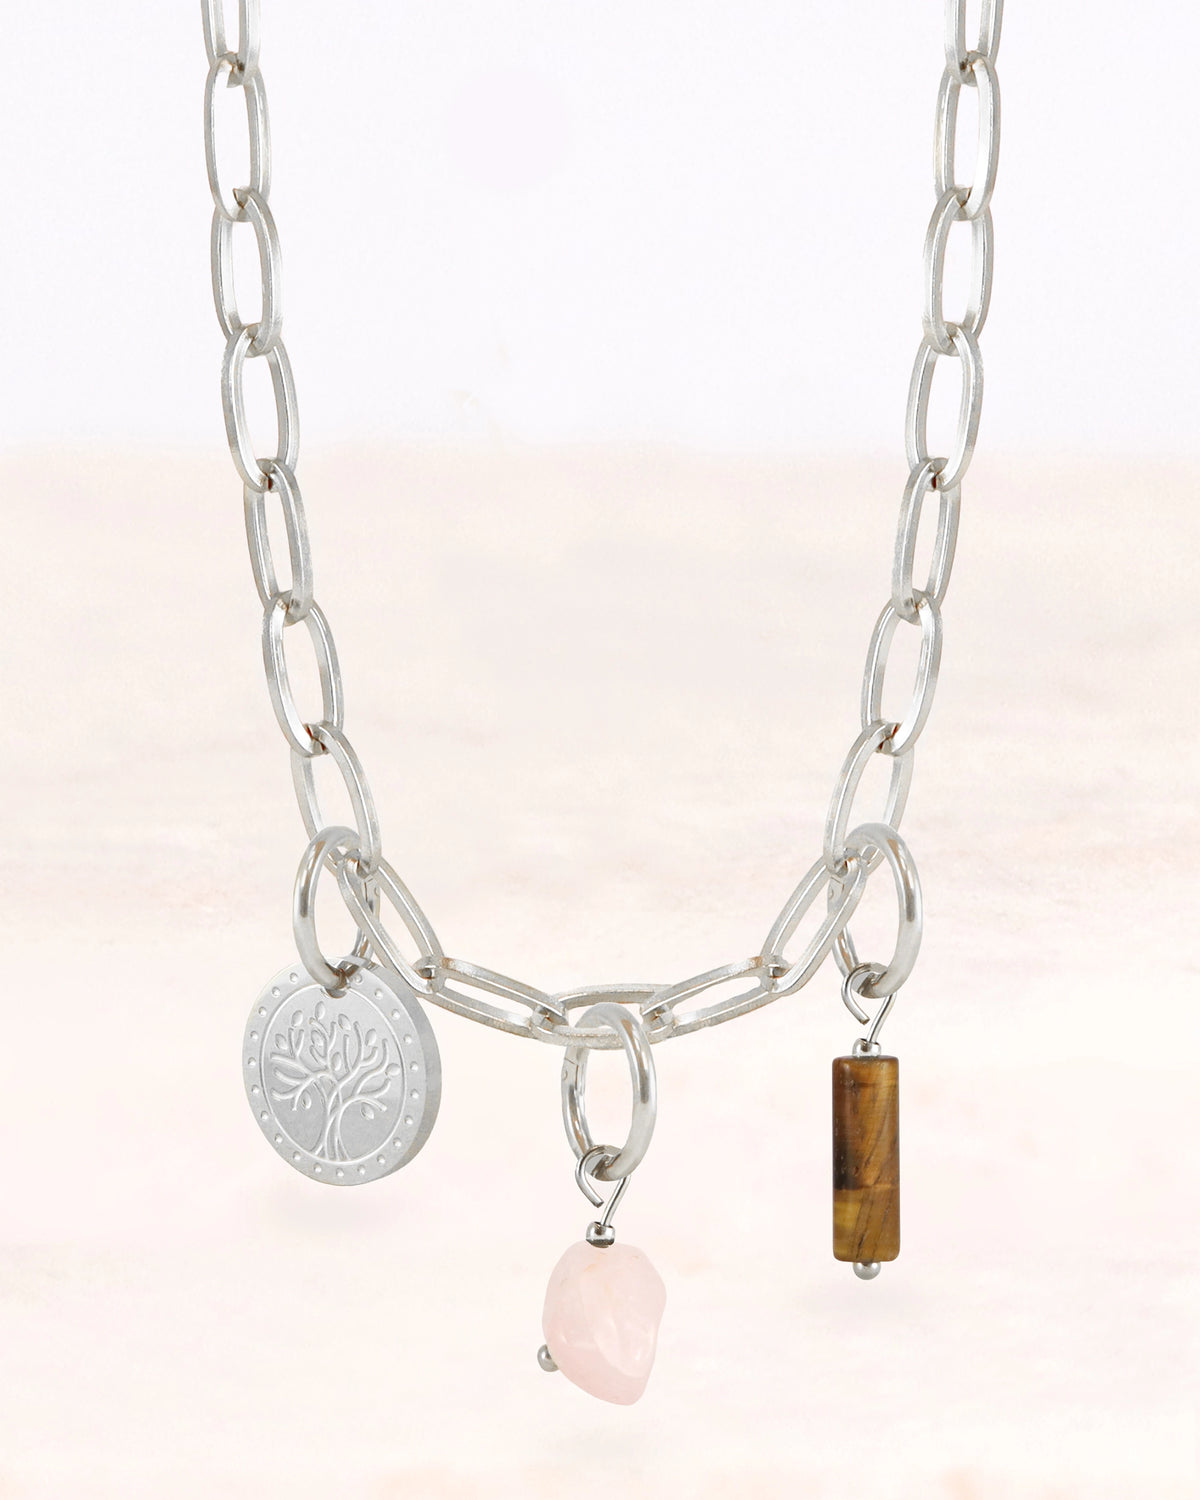 CUS® Jewellery set Yara necklace with the charms Tree of Life, Rose Quartz and Tiger's Eye